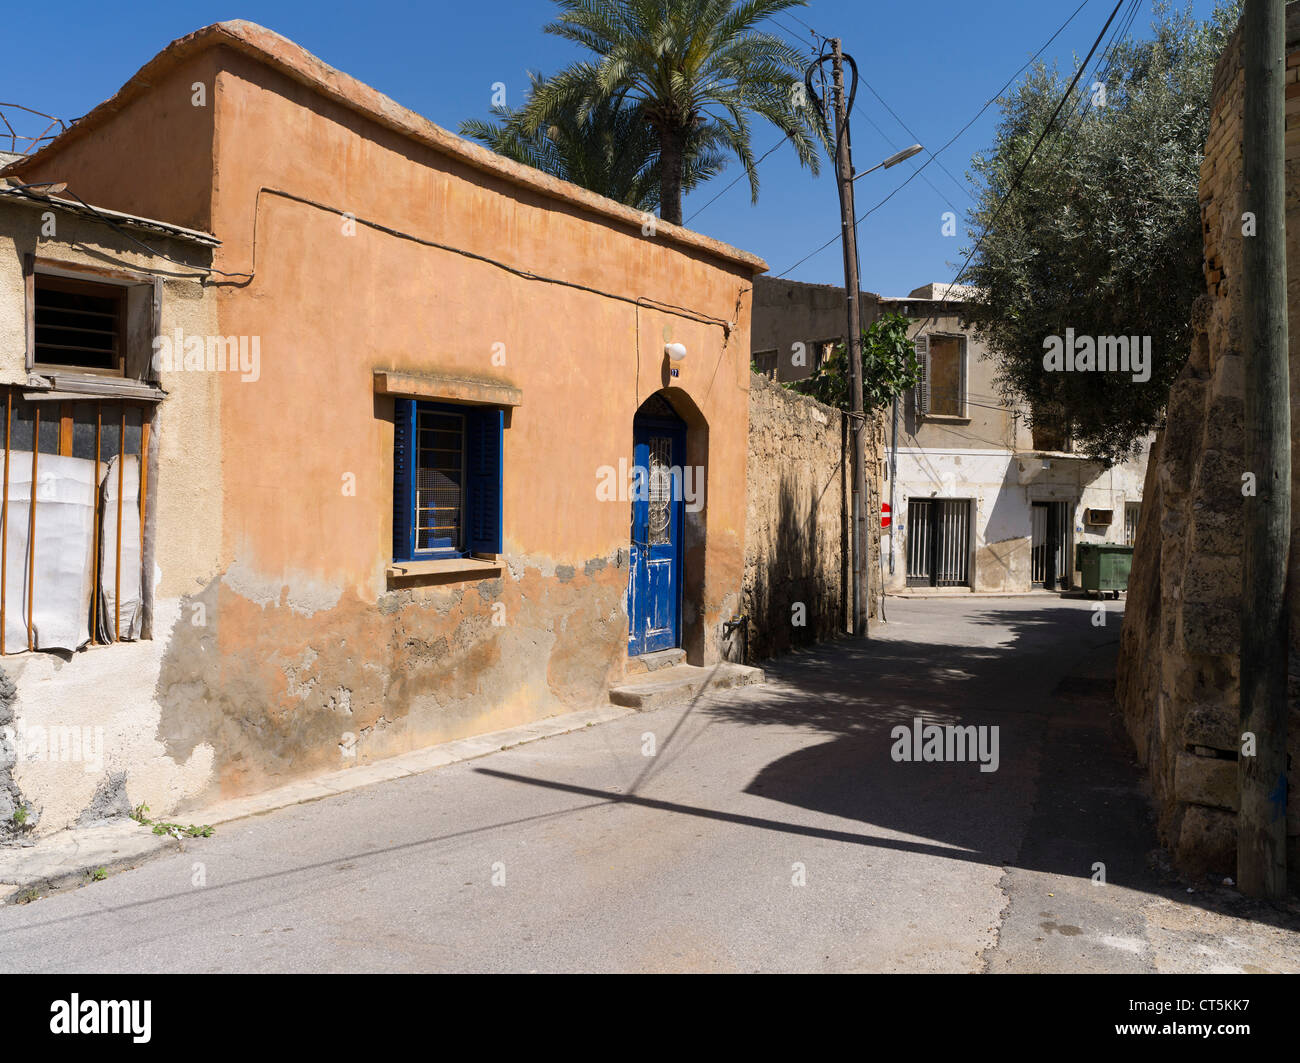 dh Old Town FAMAGUSTA NORTHERN CYPRUS Old Town street house building Stock Photo